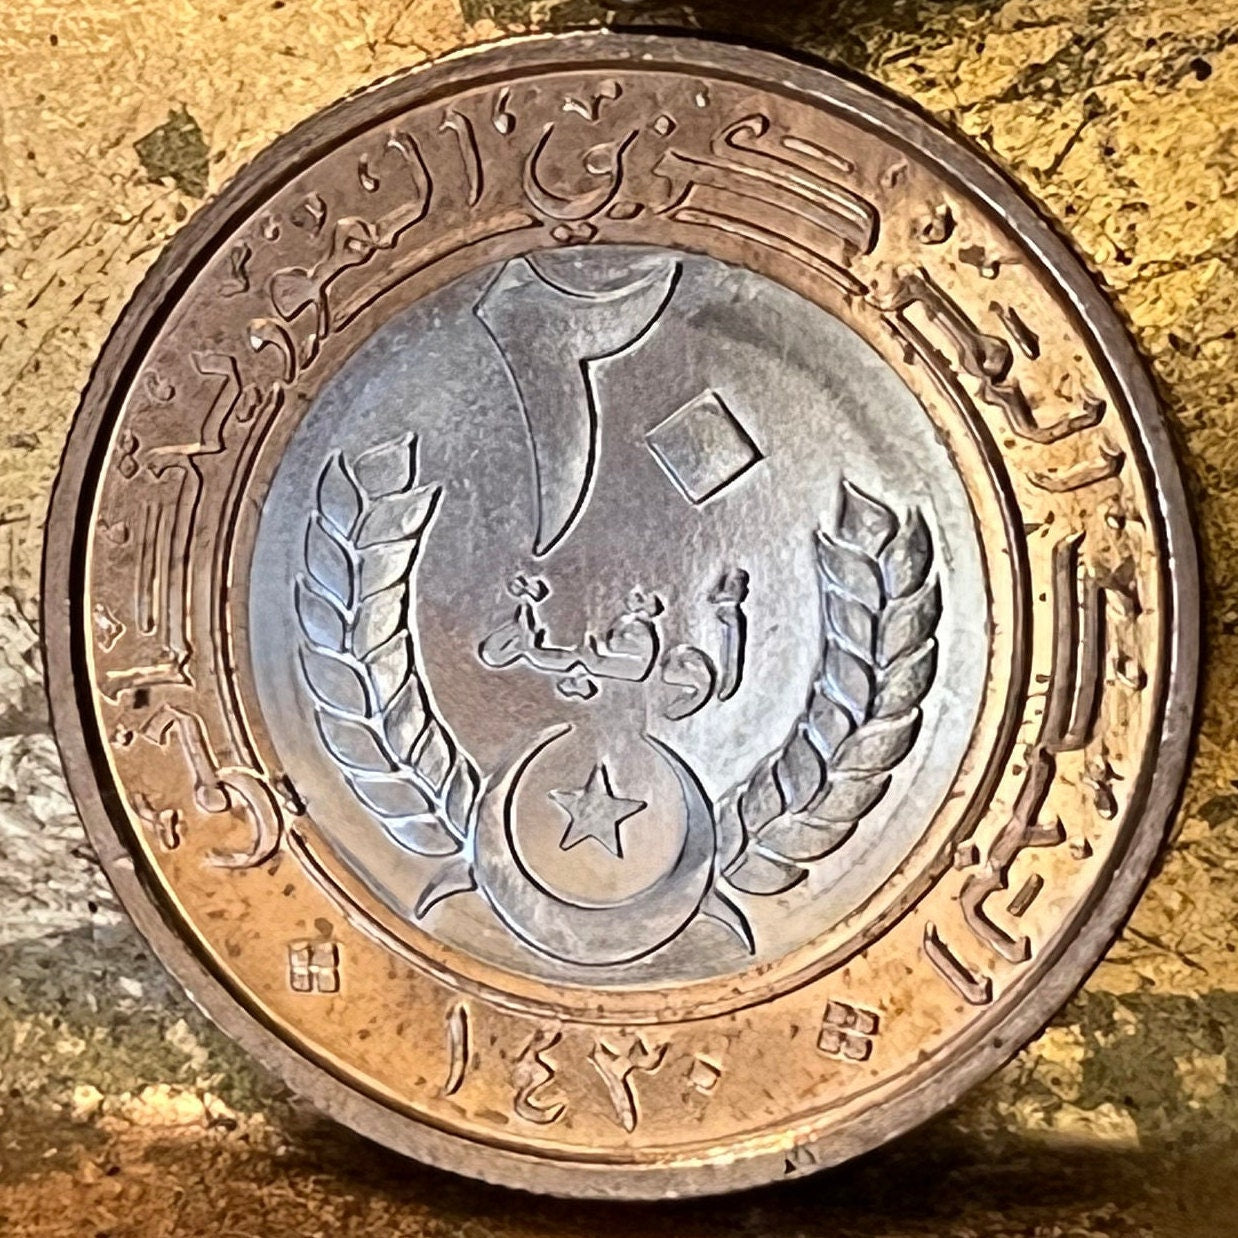 Crescent, Star, Palm Tree, Millet Branch 20 Ouguiya Mauritania Authentic Coin Money for Jewelry and Crafts (Bimetallic) (Islamic Republic)